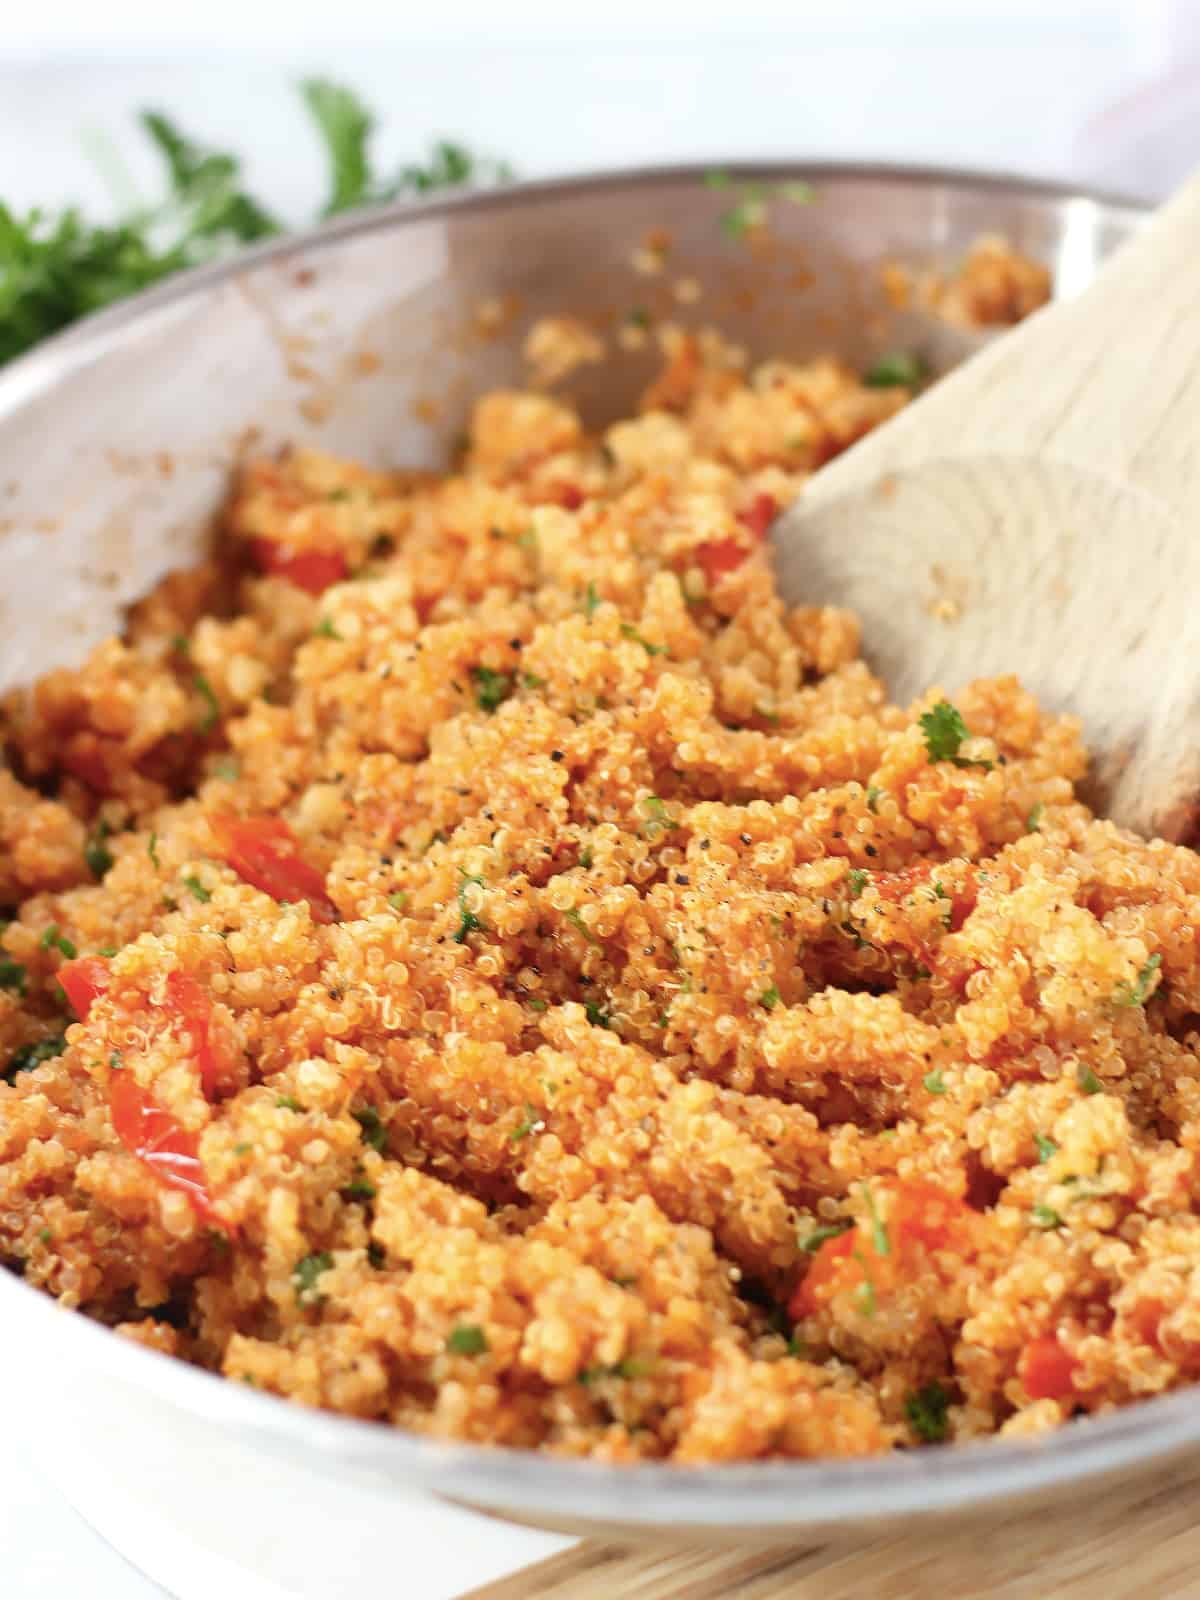 A wooden spoon stirring the quinoa and tomatoes in a skillet.